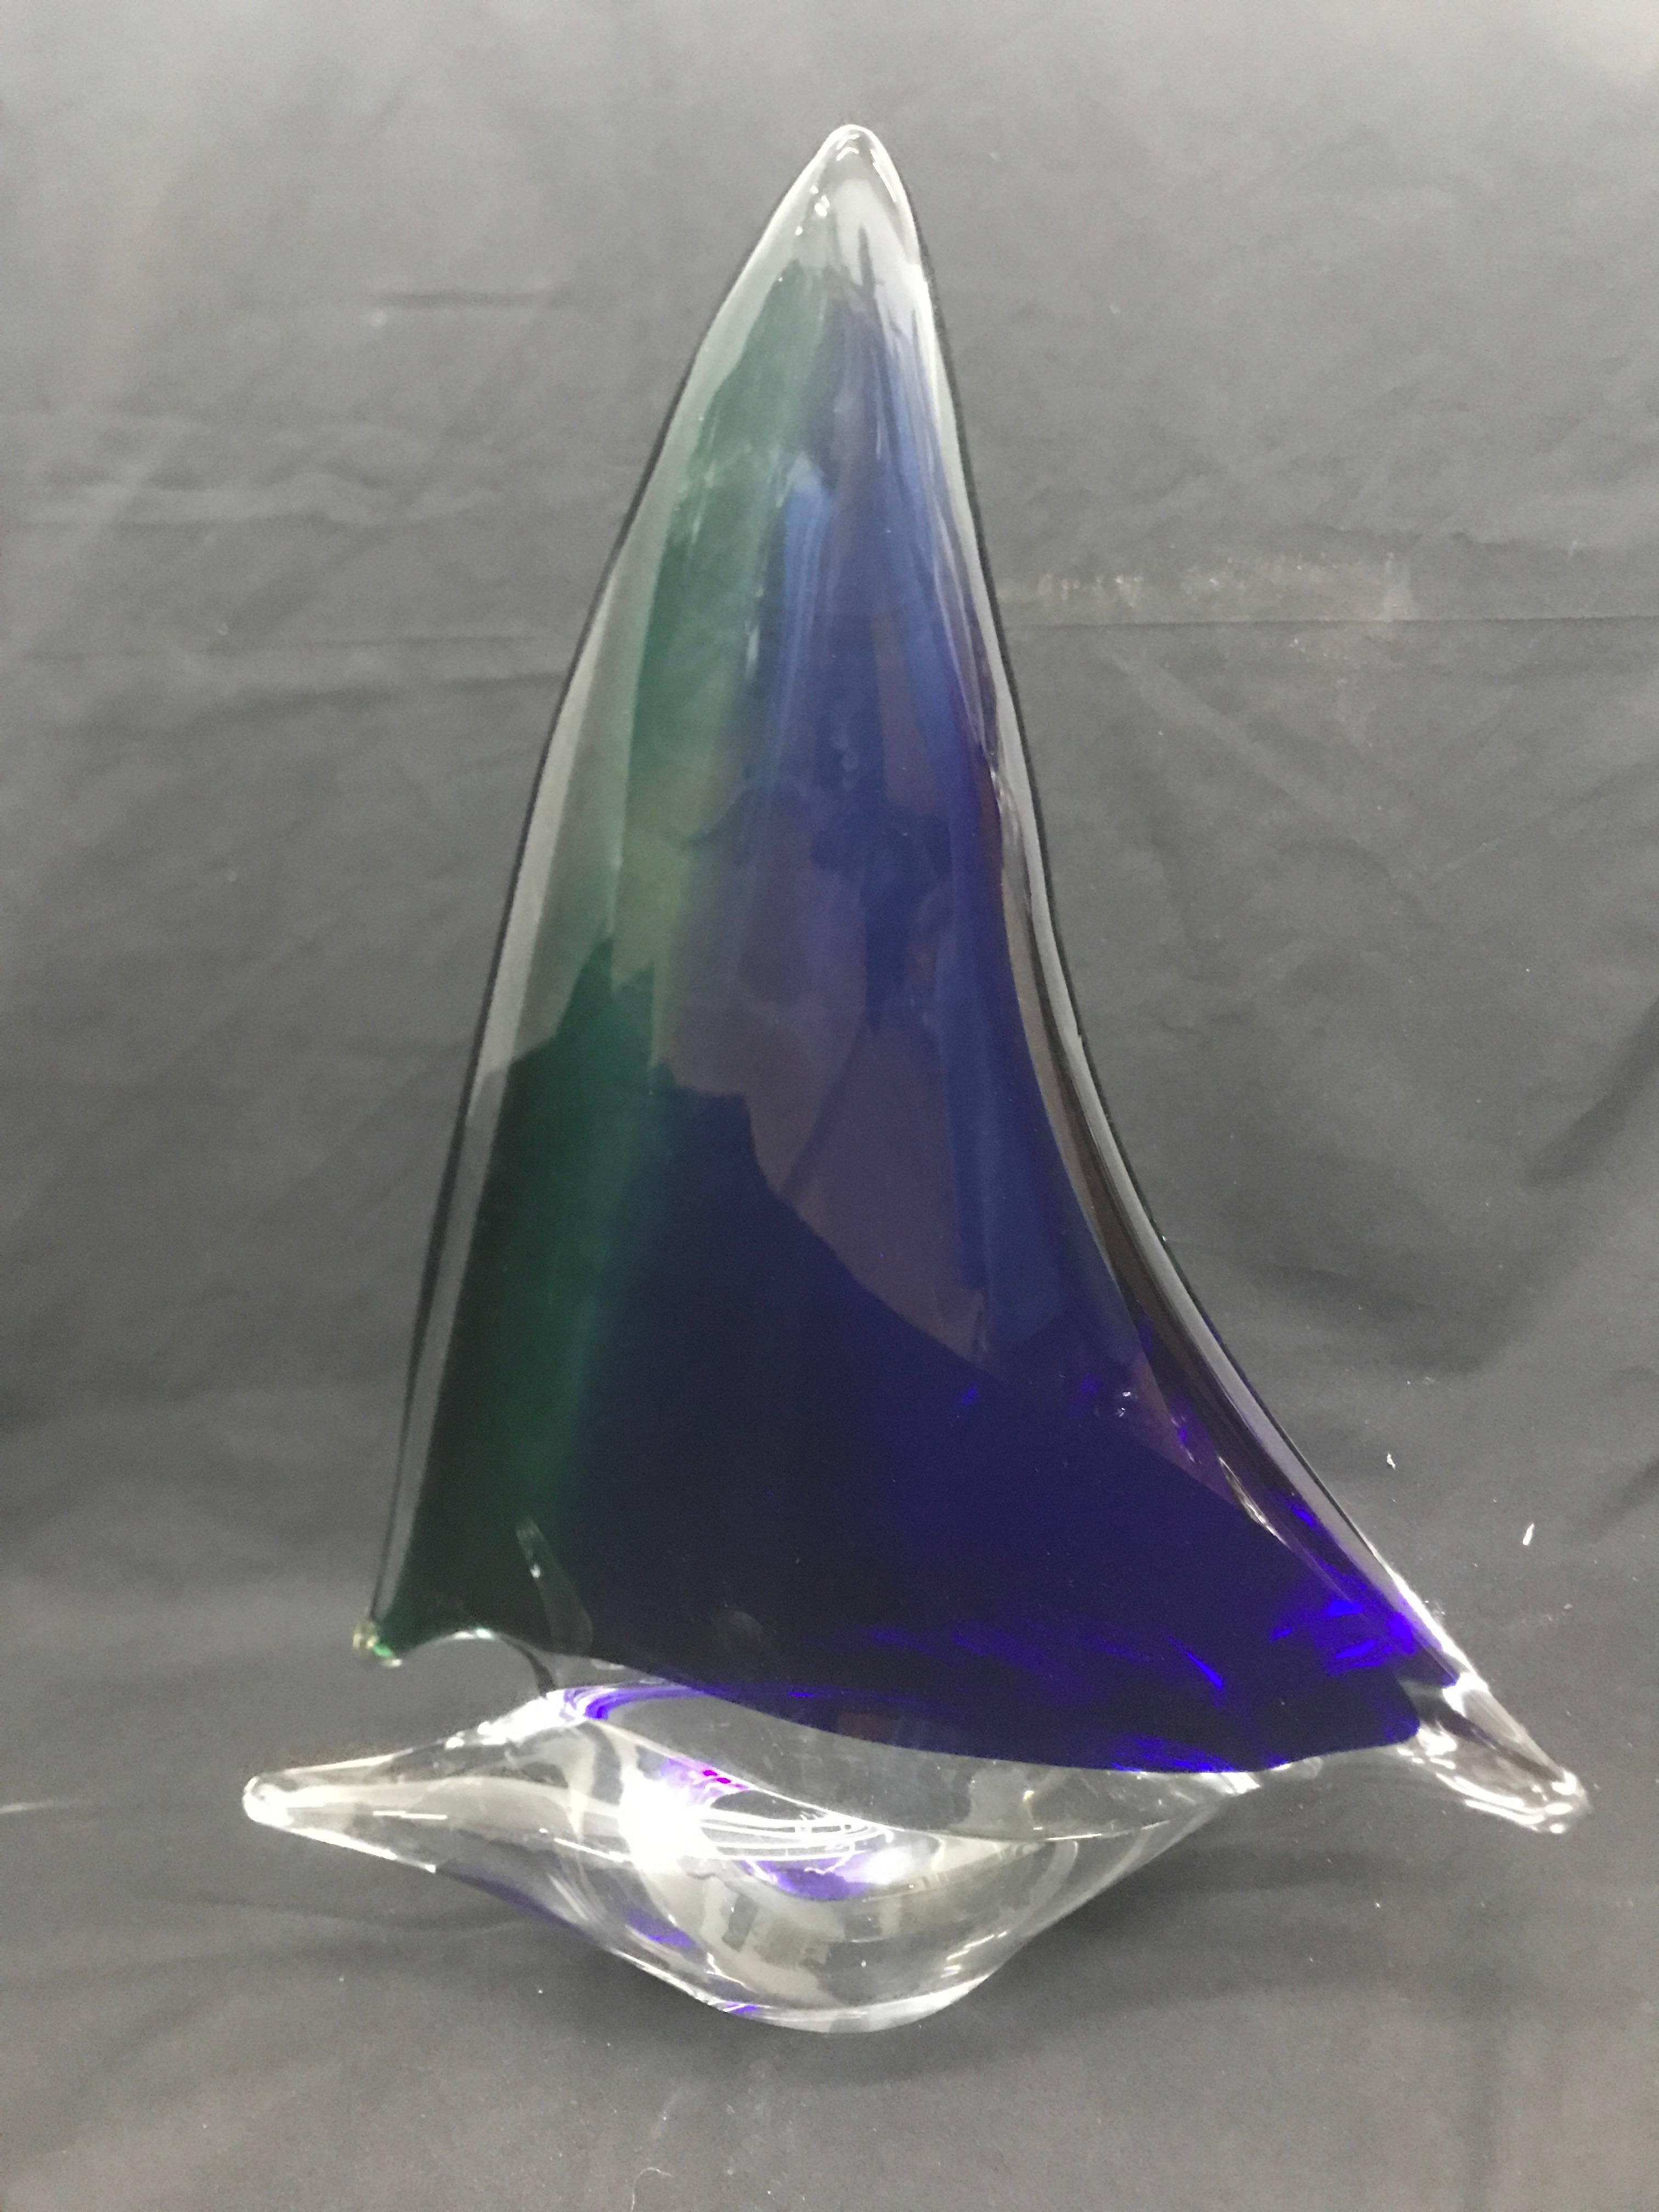 Vintage Murano glass sail boat piece, made in the 1970s. Excellent conditions. Signed GIN...V Murano, is made with the submerged glass technique. Murano is a small island in the lagoon of Venice, where the art of glassmaking has more than 700 years